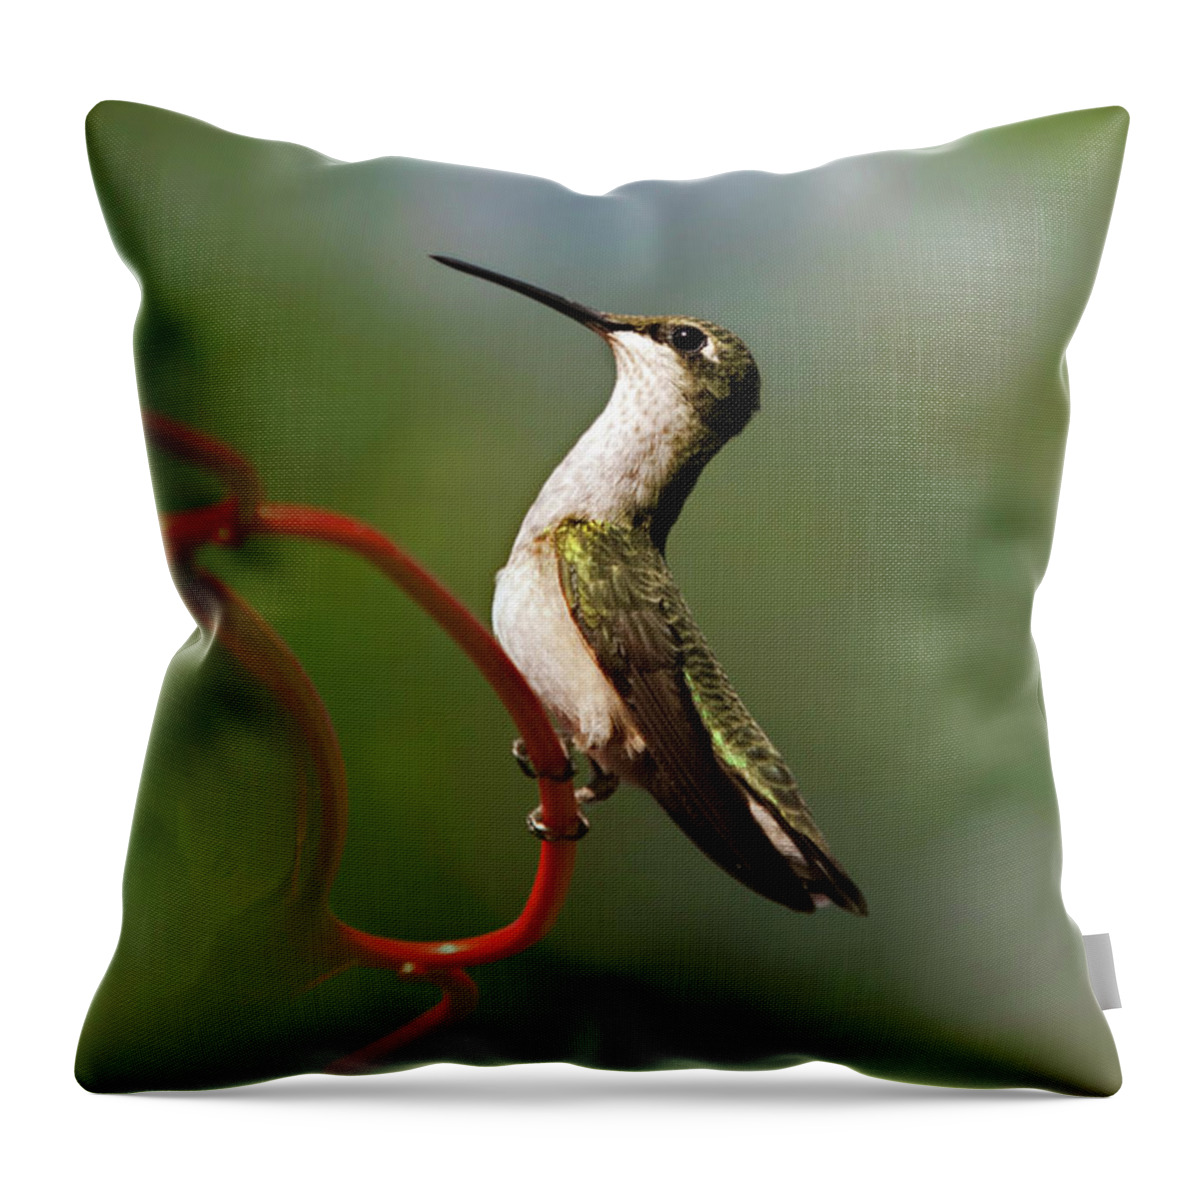 Hummingbird Throw Pillow featuring the photograph Hummingbird Eloquent Appeal by Christina Rollo